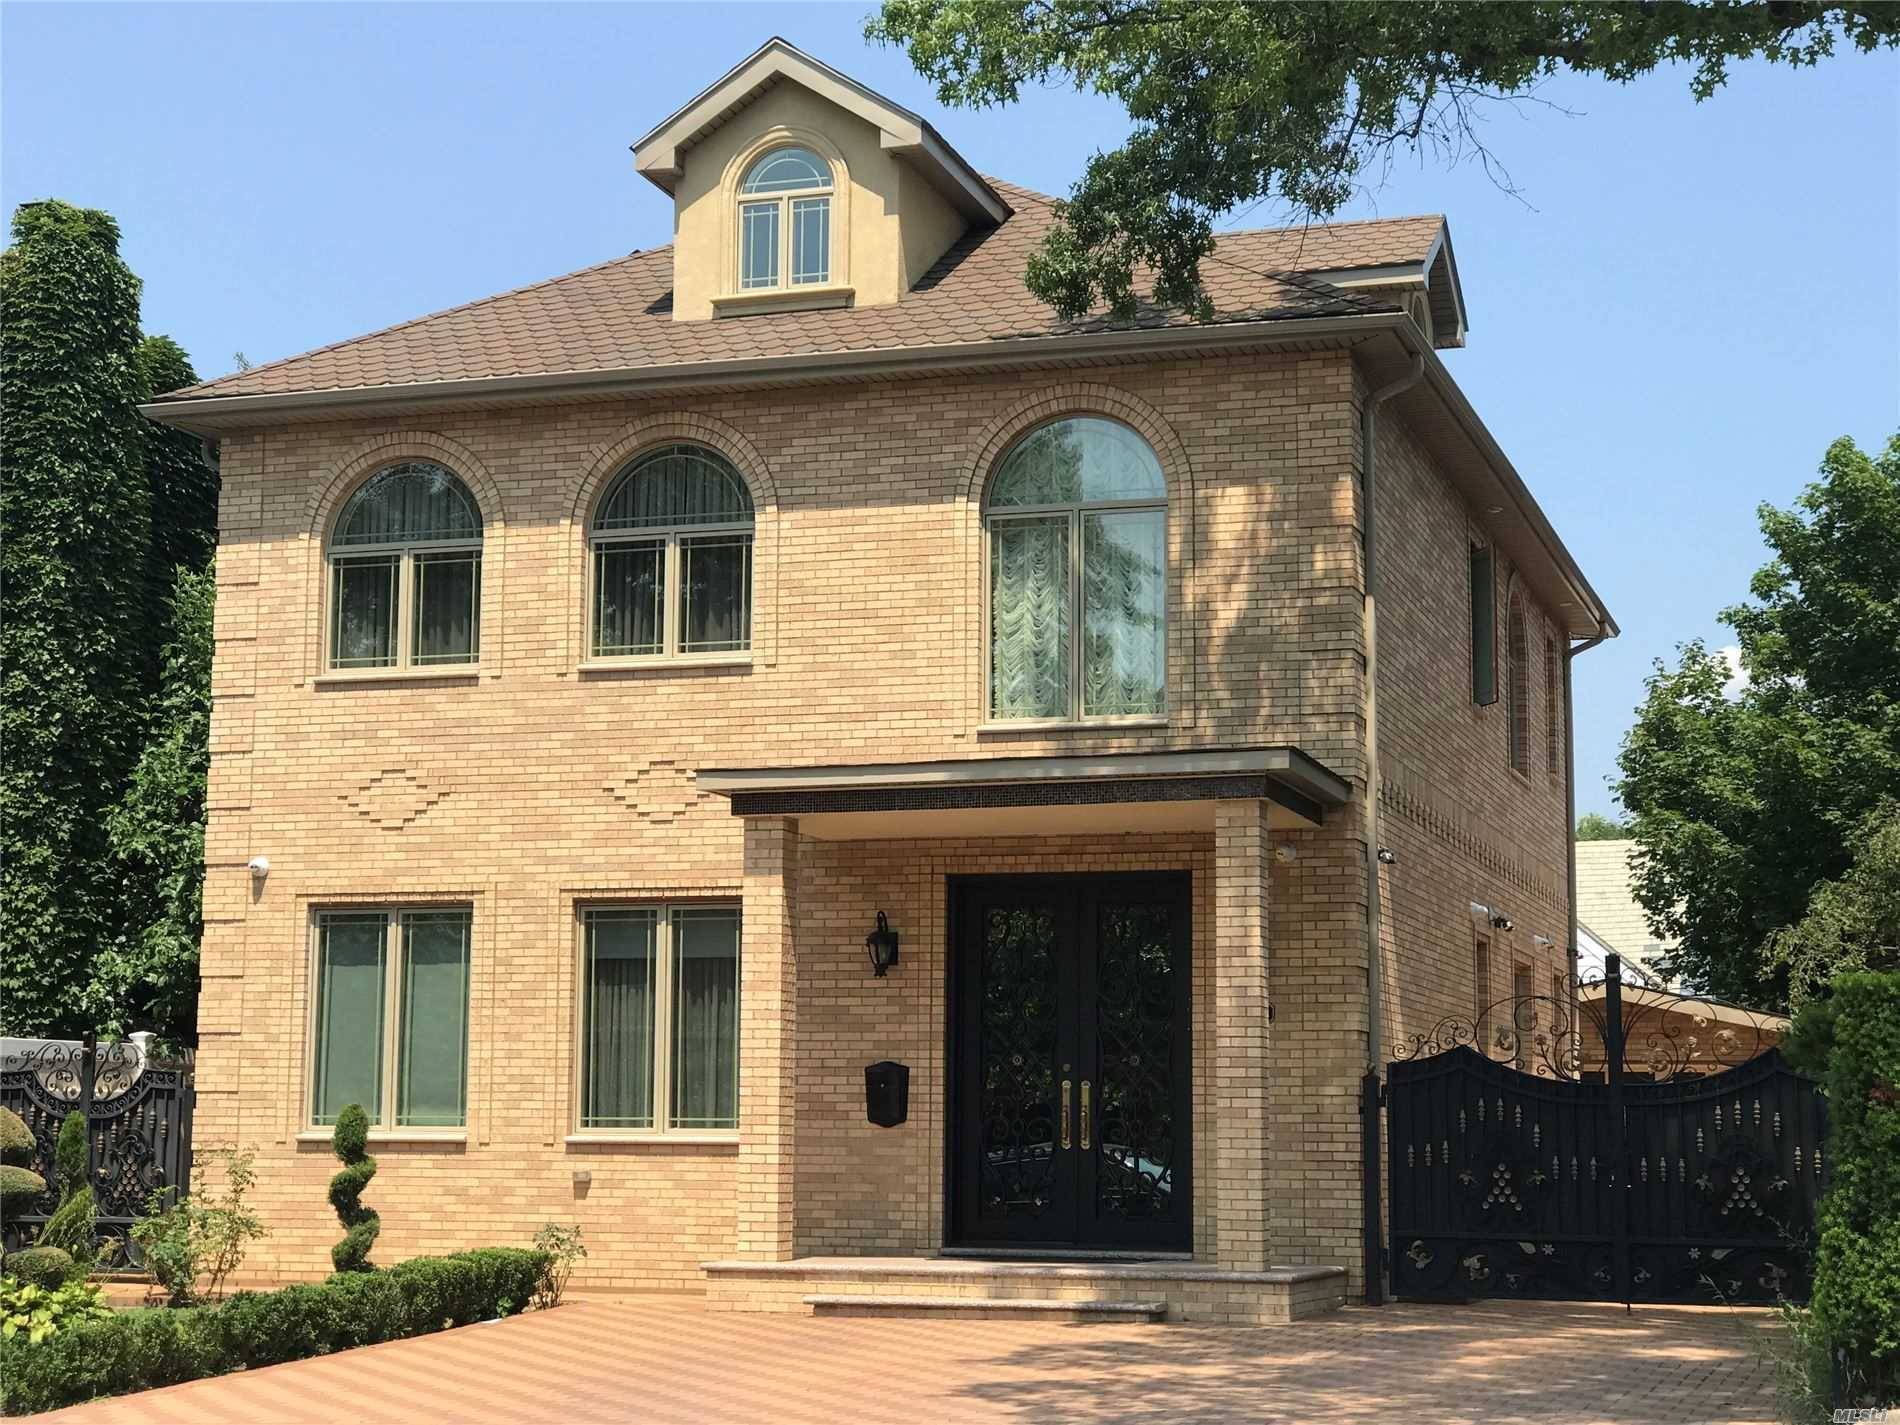 New stunningly designed and decorated, brick detached 5 BR, 4.